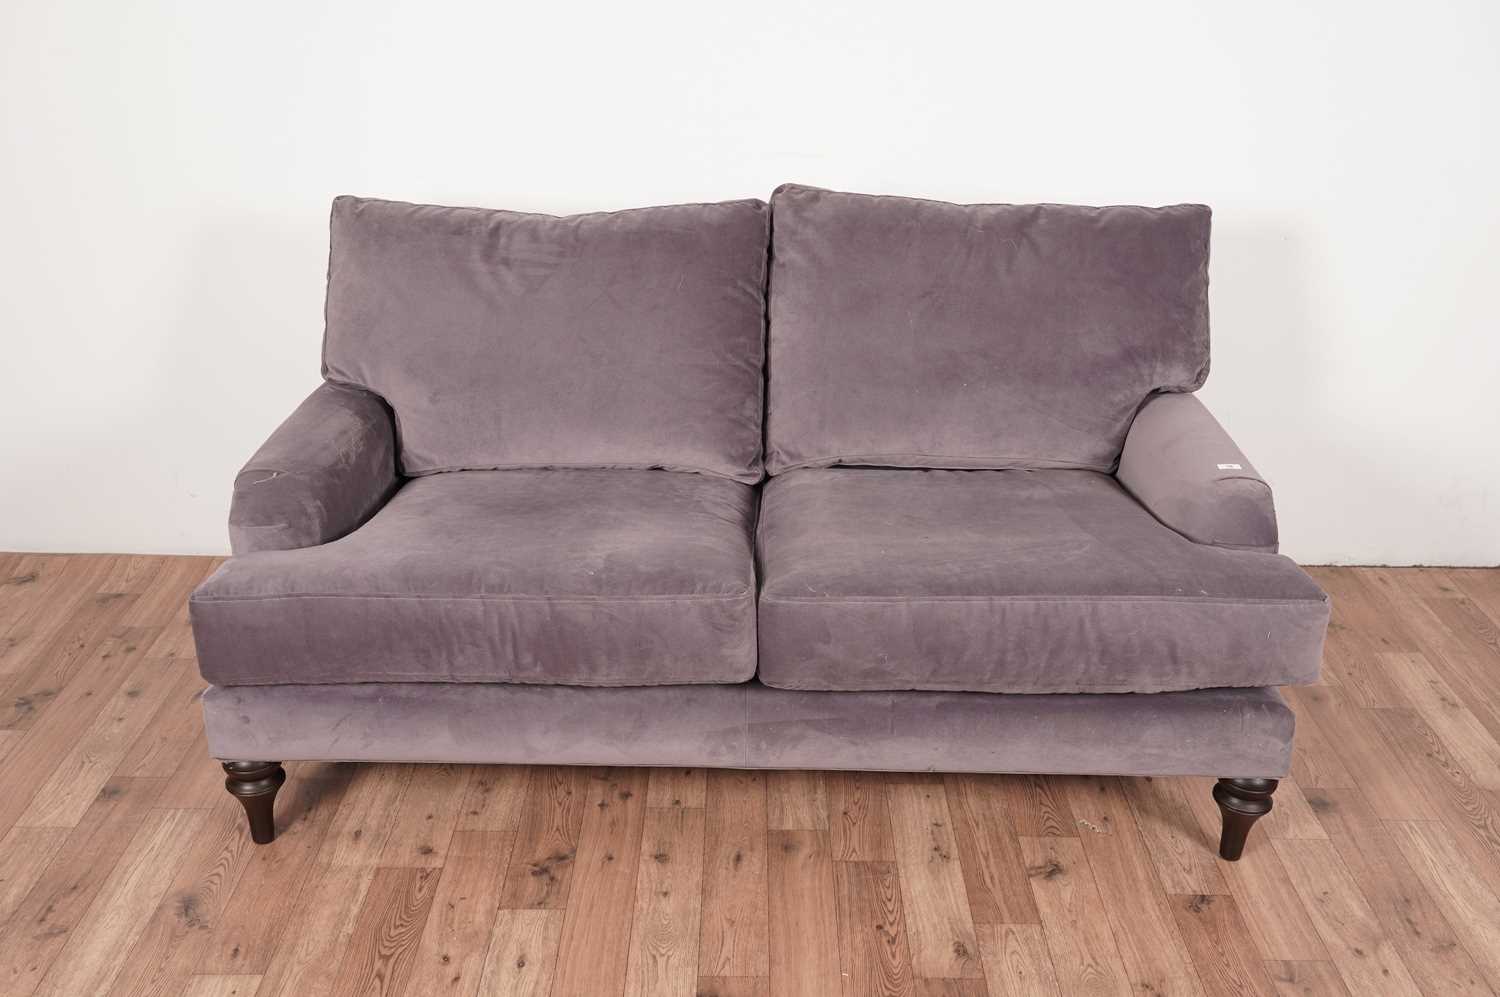 A grey two-seater sofa by The Lounge Co